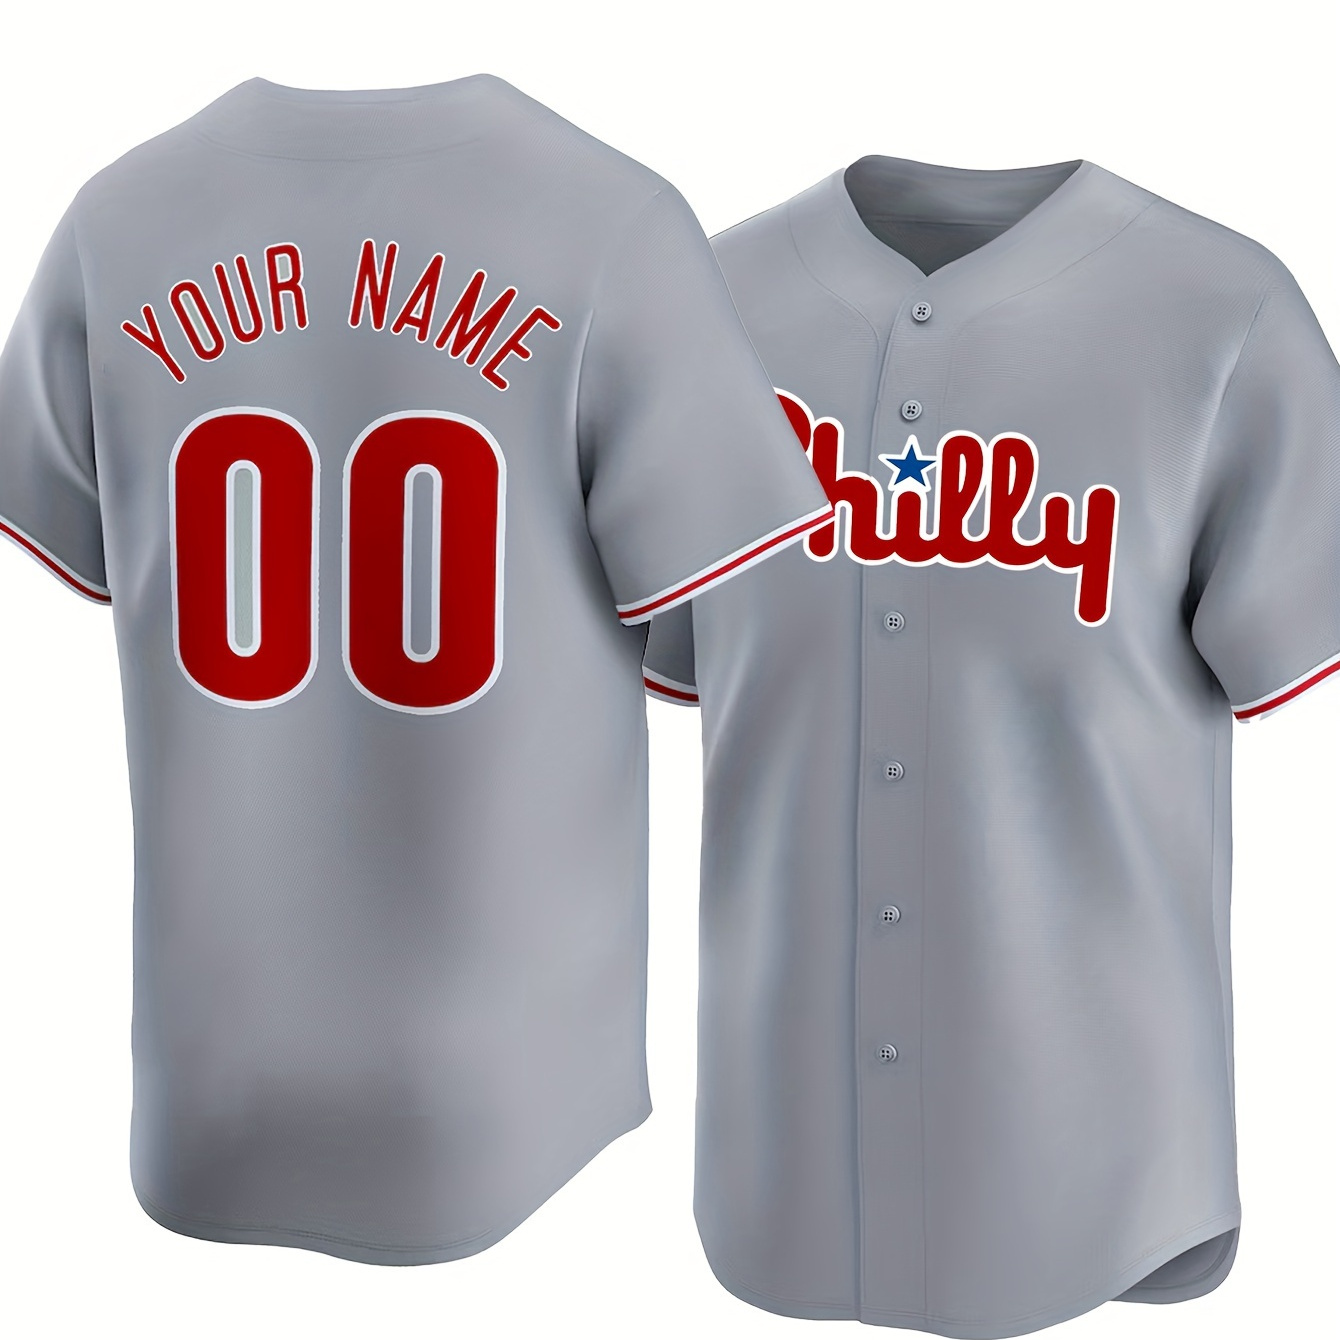 

Customized Name And Number Design, Men's Short Sleeve Loose Breathable V-neck Baseball Jersey, Sports Shirt For Team Training